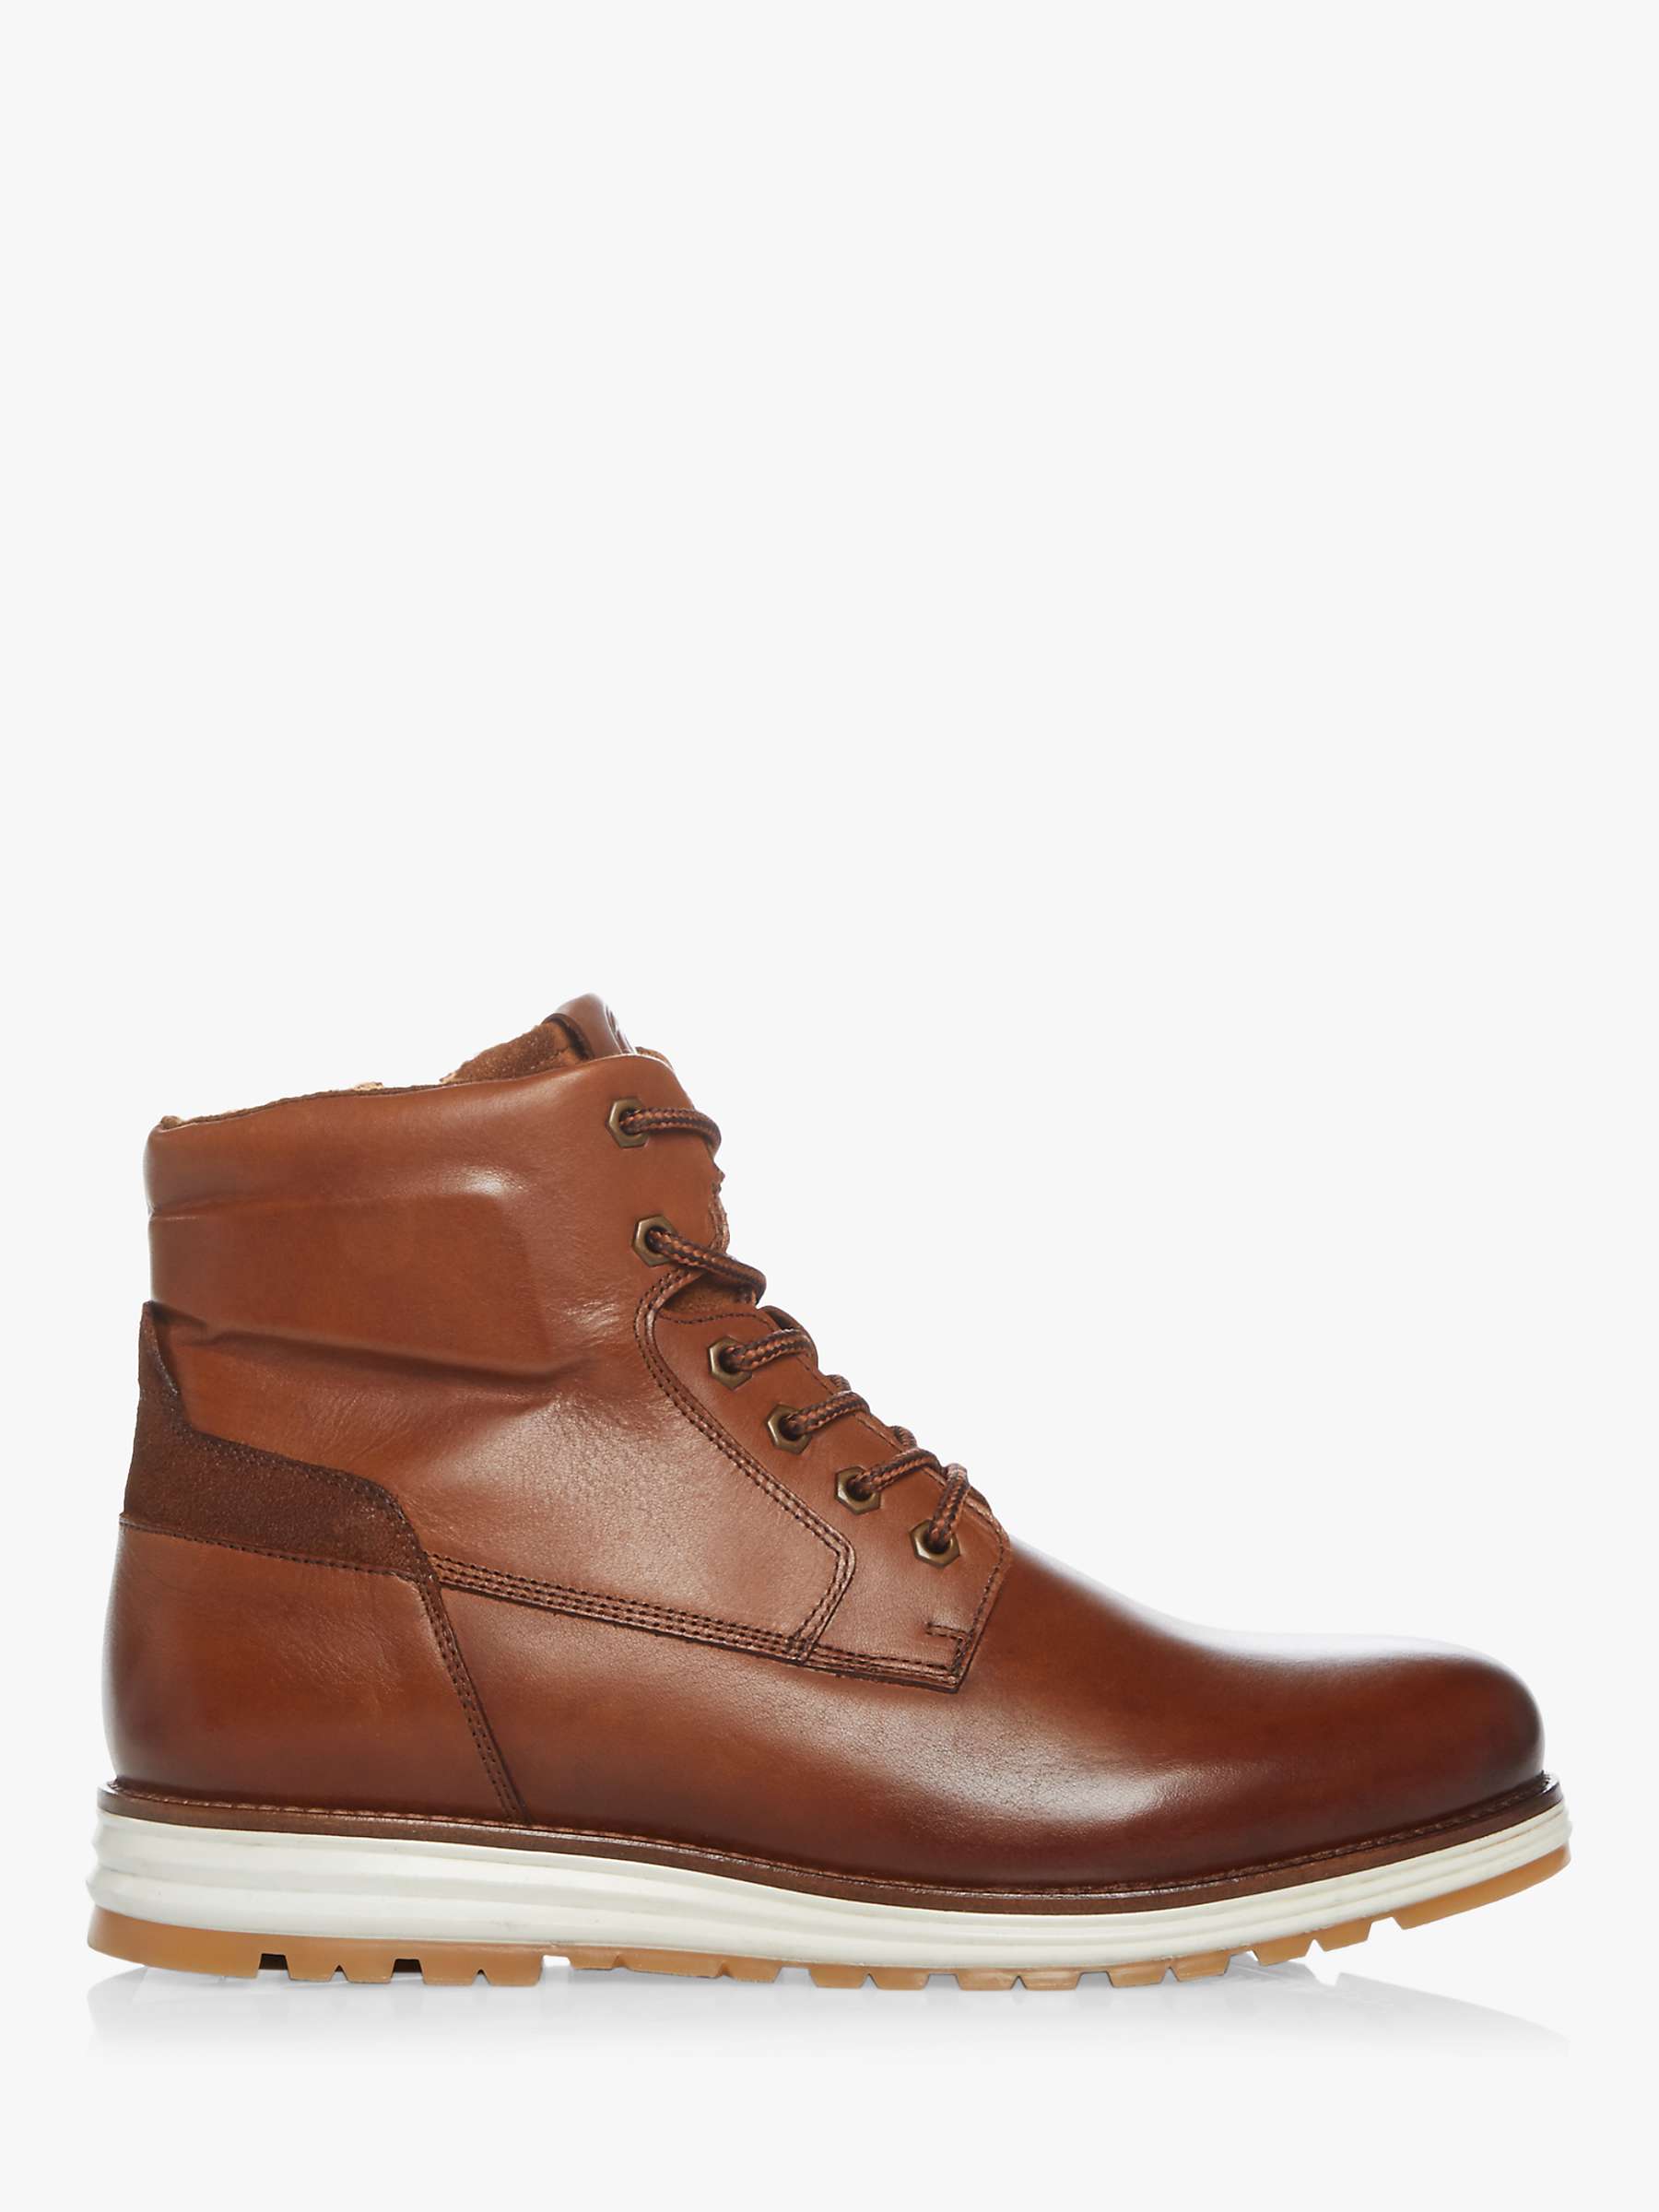 Dune Catchy Casual Wedge Hiker Boots, Tan at John Lewis & Partners